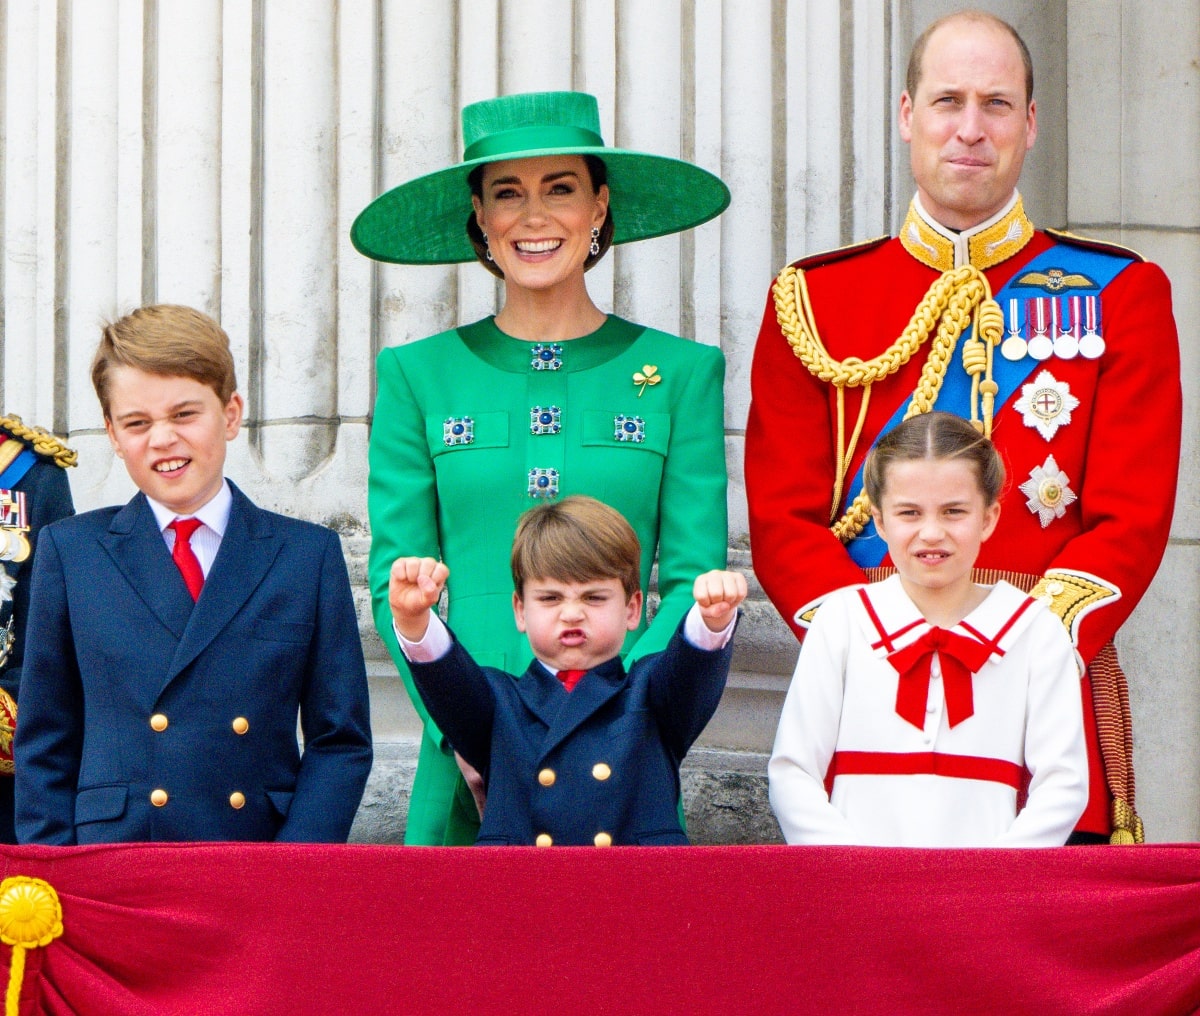 Catherine, Princess of Wales with Prince William of Wales, Prince George, Prince Louis, and Princess Charlotte stealing the spotlight during the first Trooping the Colour ceremony